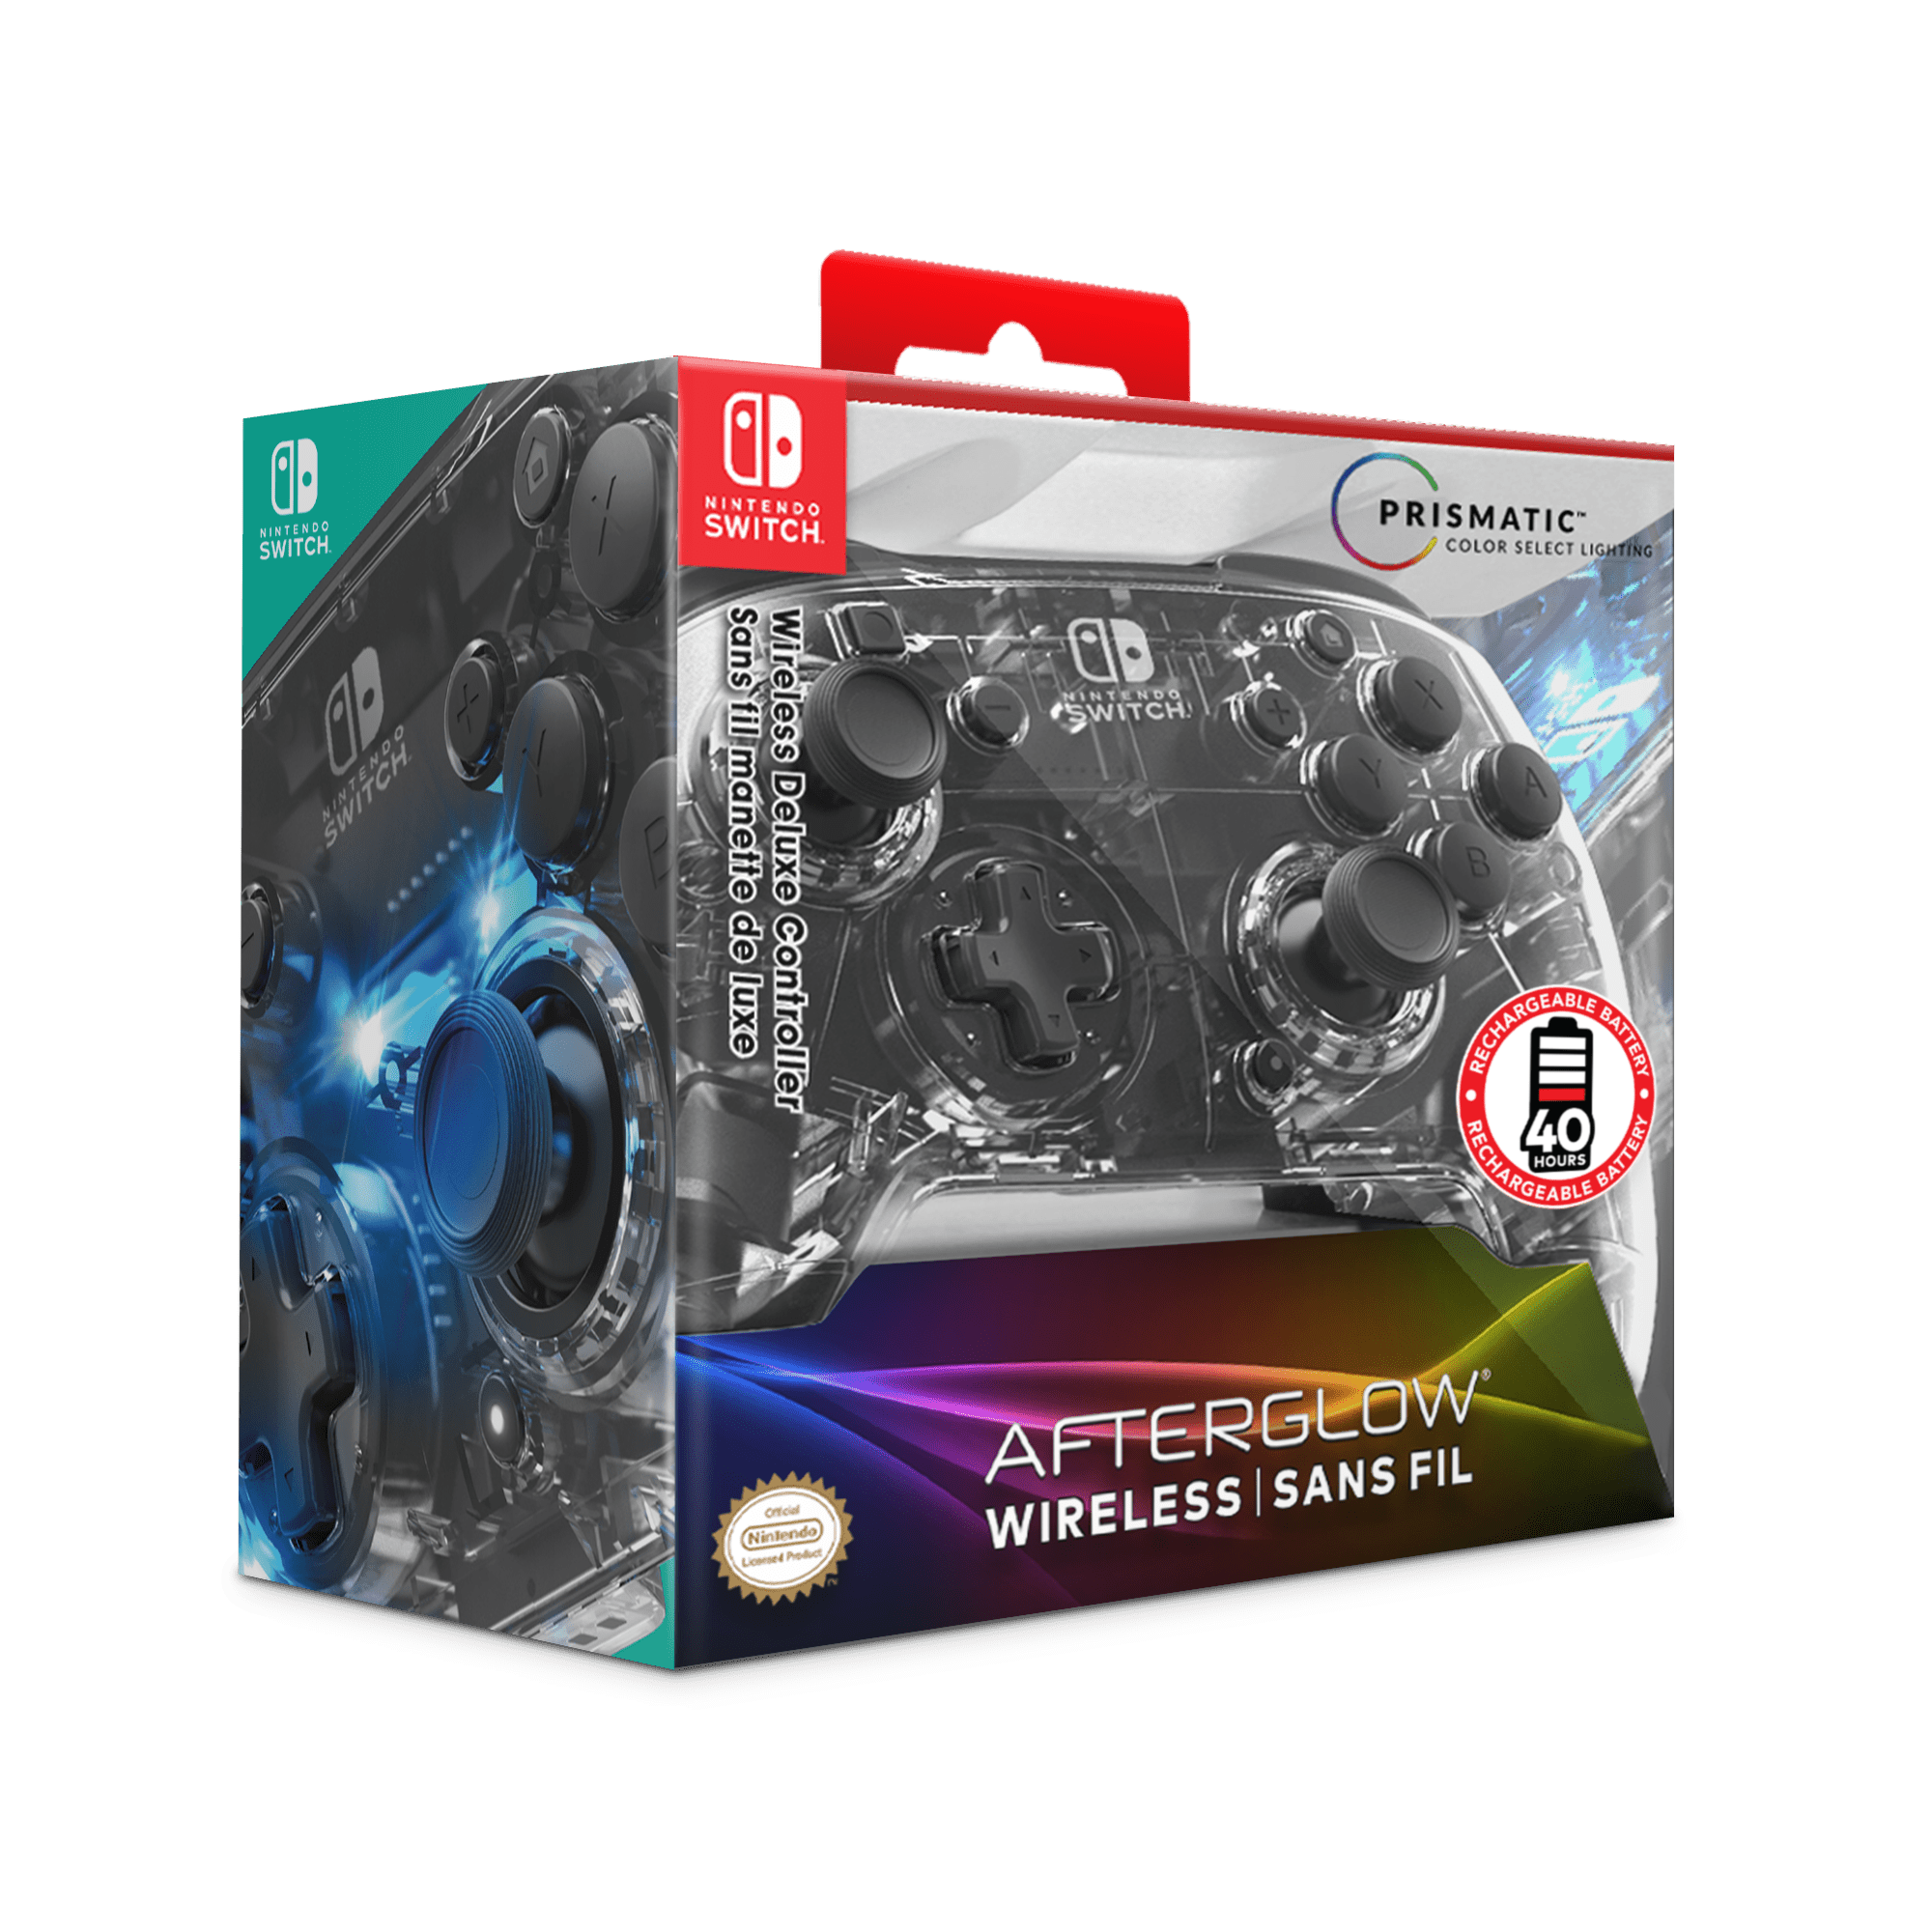 PDP Wireless Afterglow Deluxe Controller Gamepad For Nintendo Switch